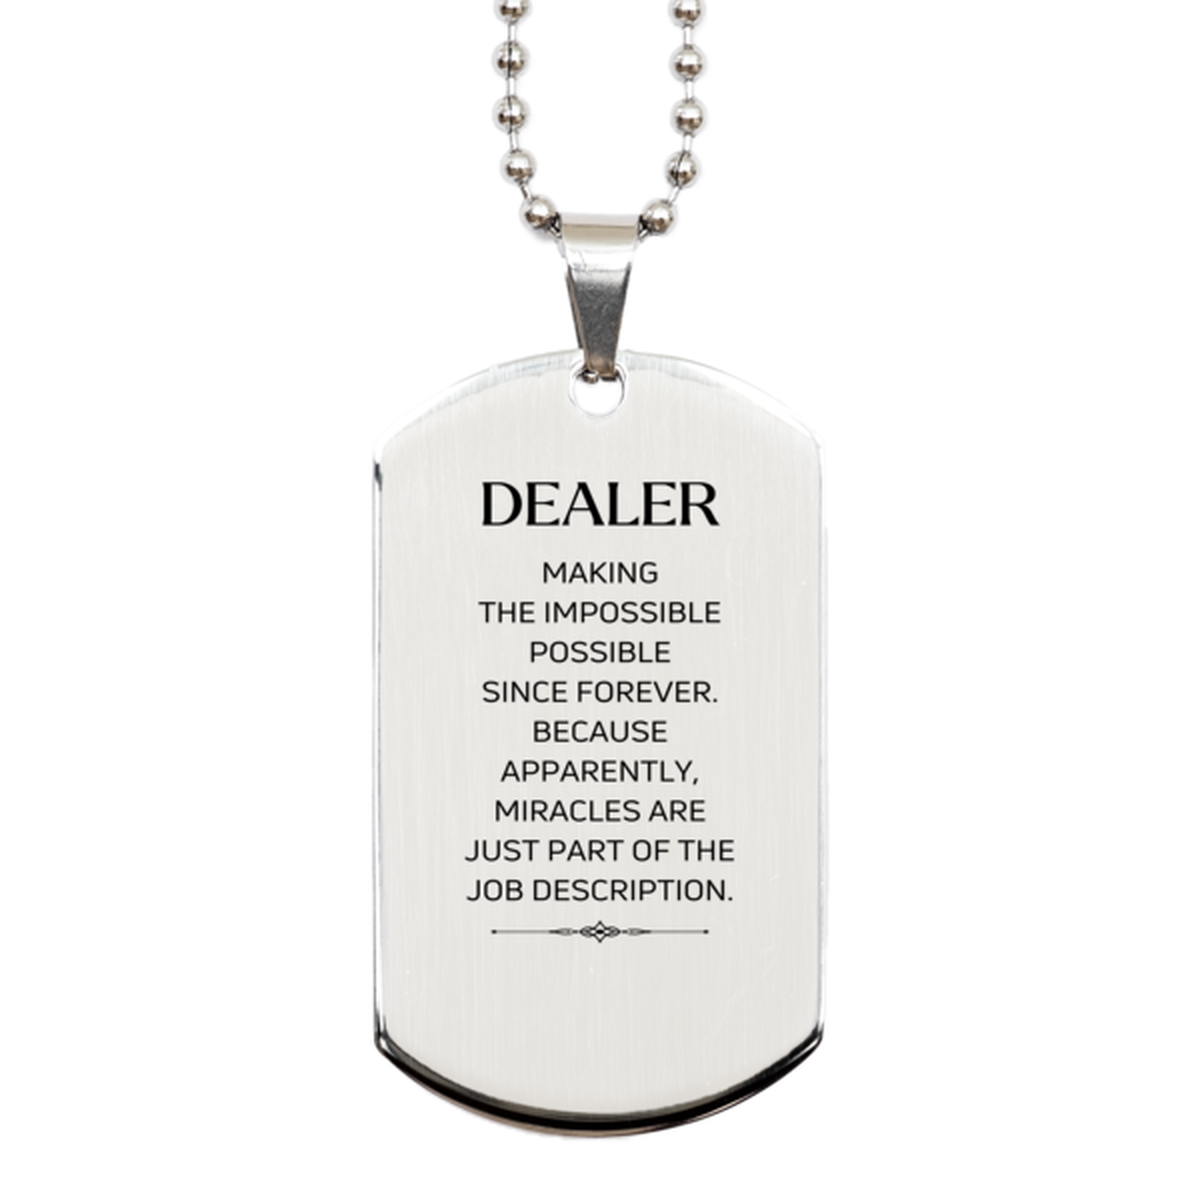 Funny Dealer Gifts, Miracles are just part of the job description, Inspirational Birthday Silver Dog Tag For Dealer, Men, Women, Coworkers, Friends, Boss